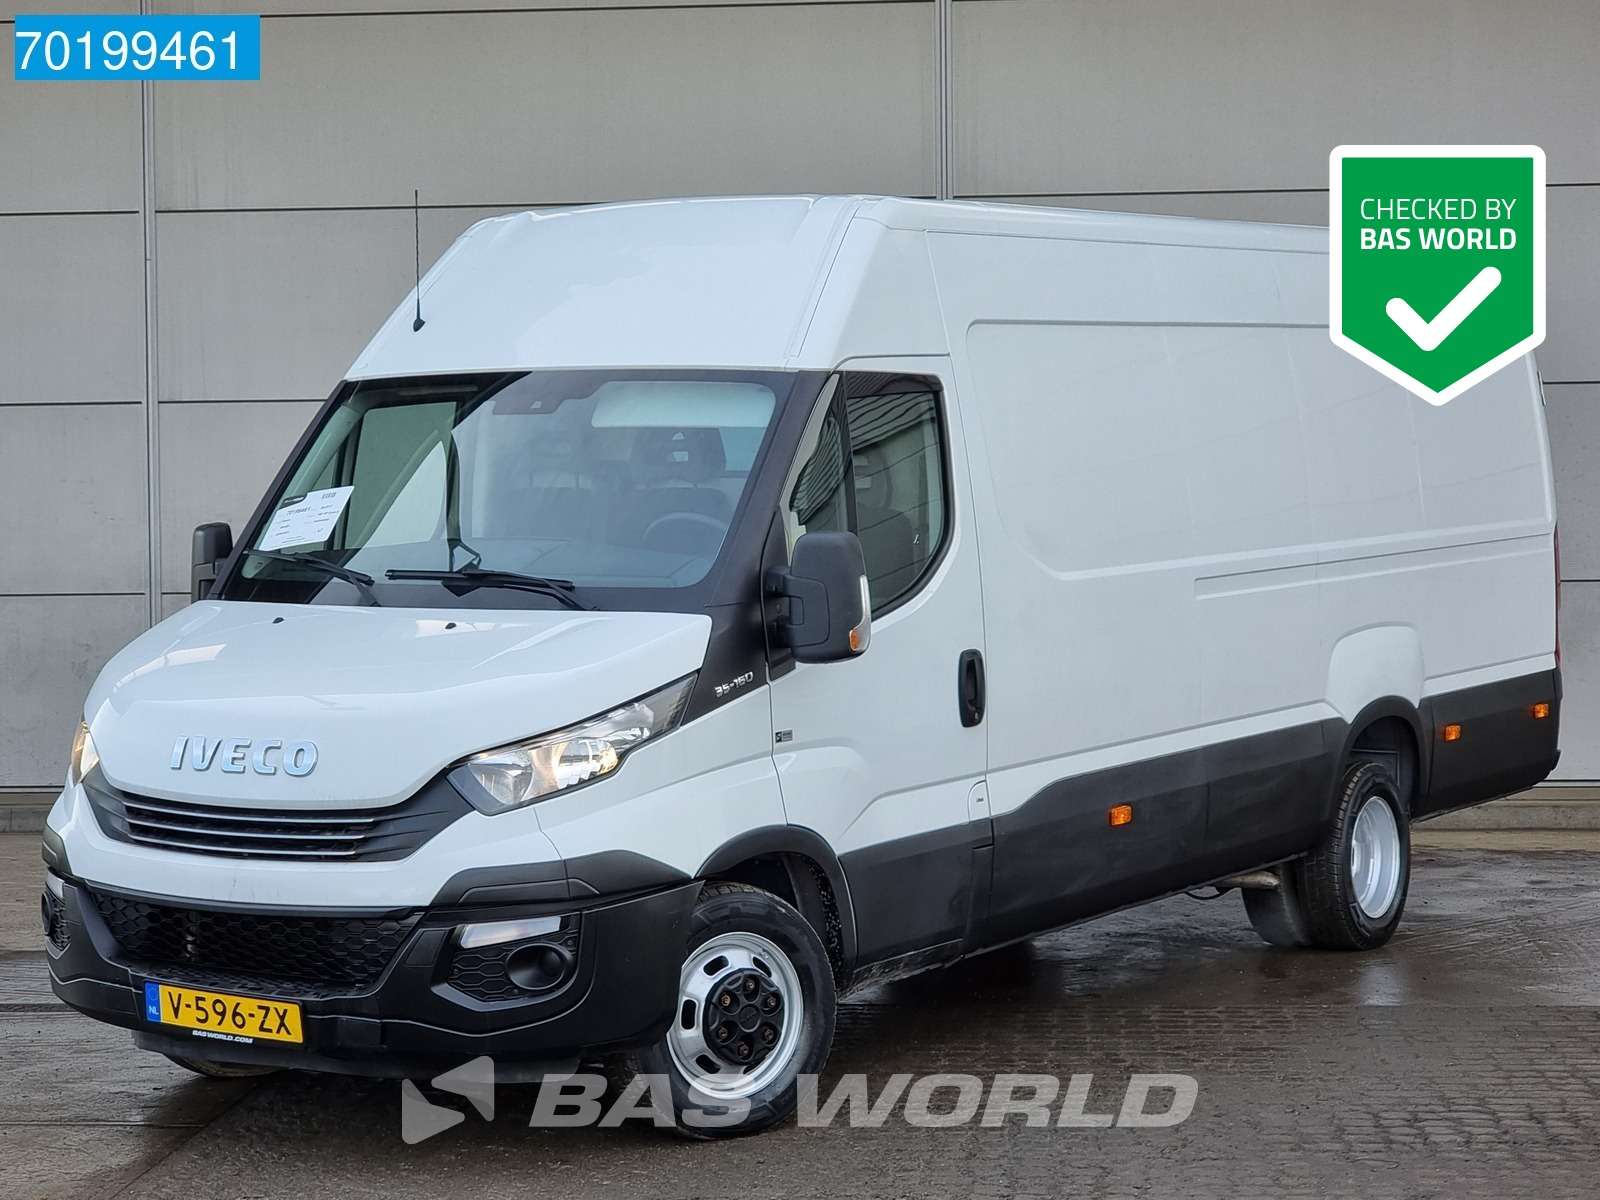 Iveco Daily Transporter in White used in VEGHEL for € 22,567.-